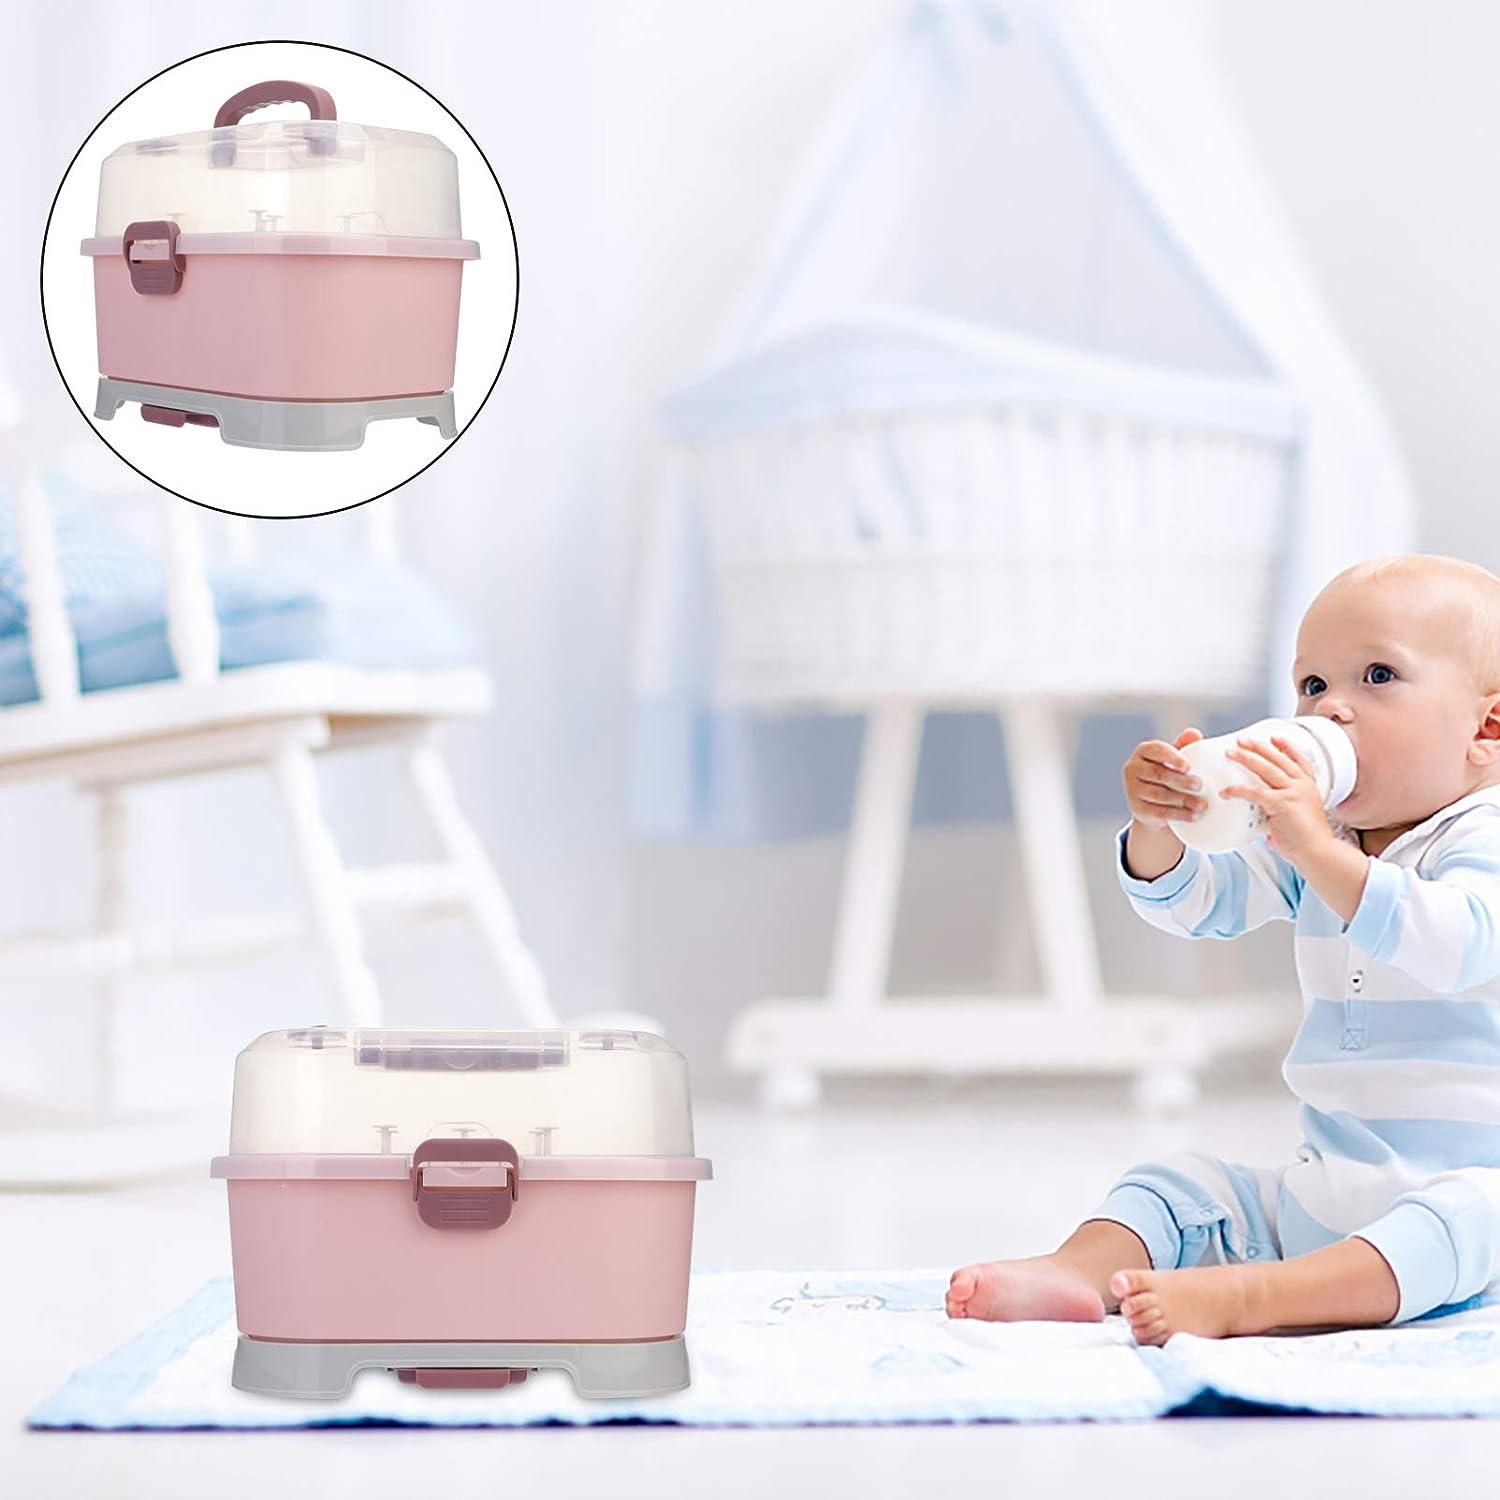 Toddmomy 1pc Portable Baby Bottle Drying Rack Storage Box Organizer with  Anti-Dust Cover,Large Nursing Bottle Storage Box Organizer for Home Kitchen